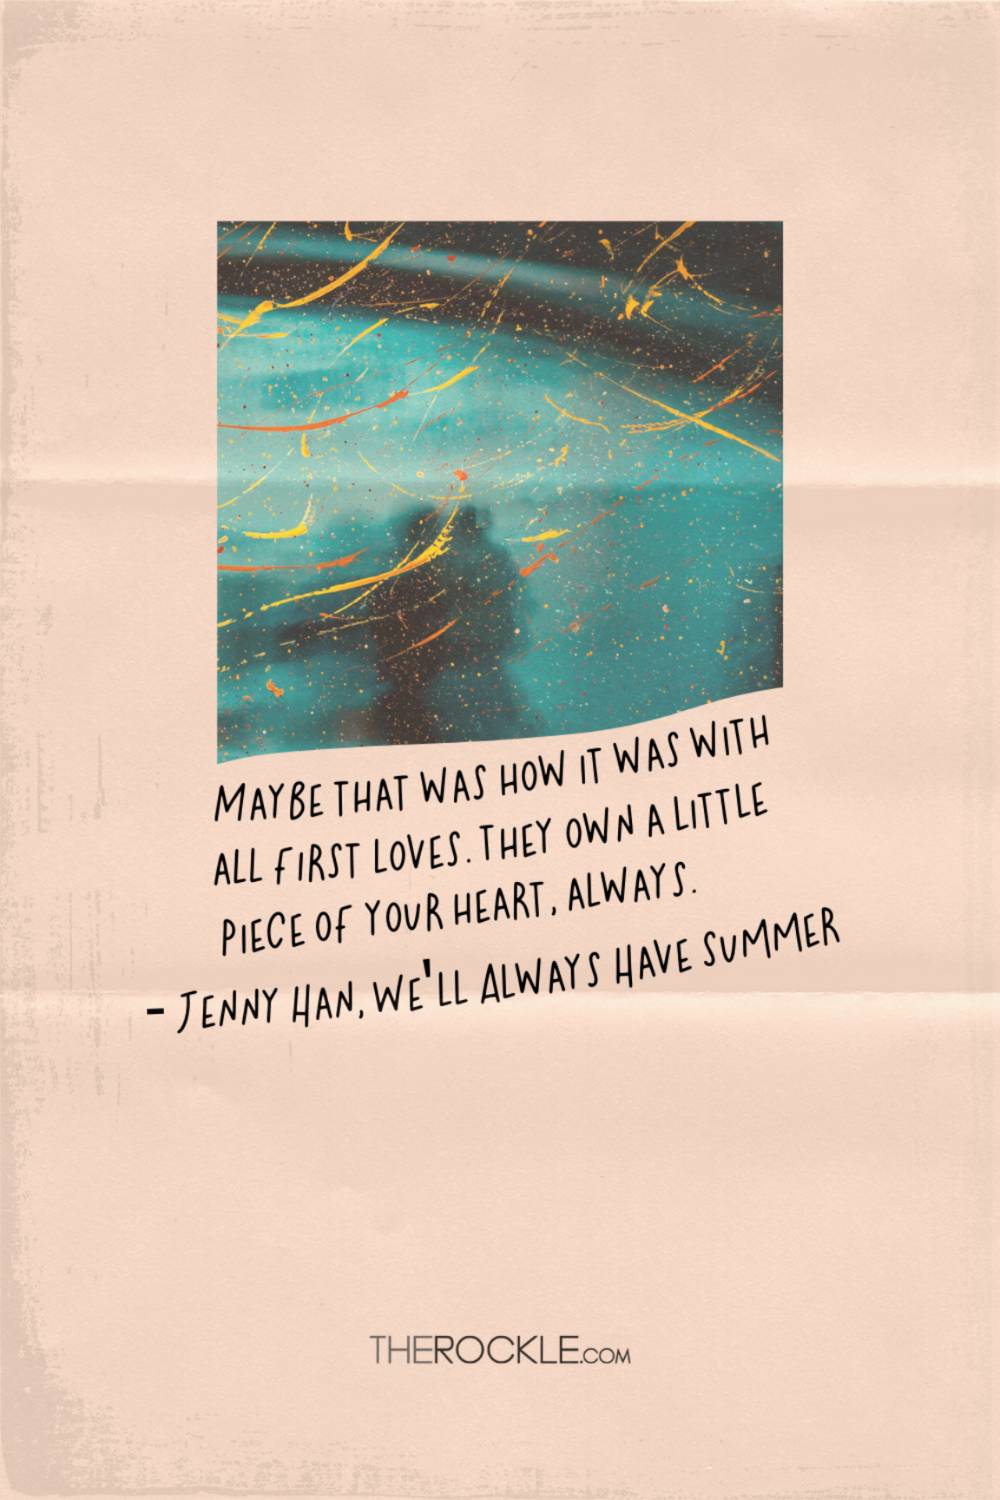 Quote from Jenny Han's book We'll Always Have Summer